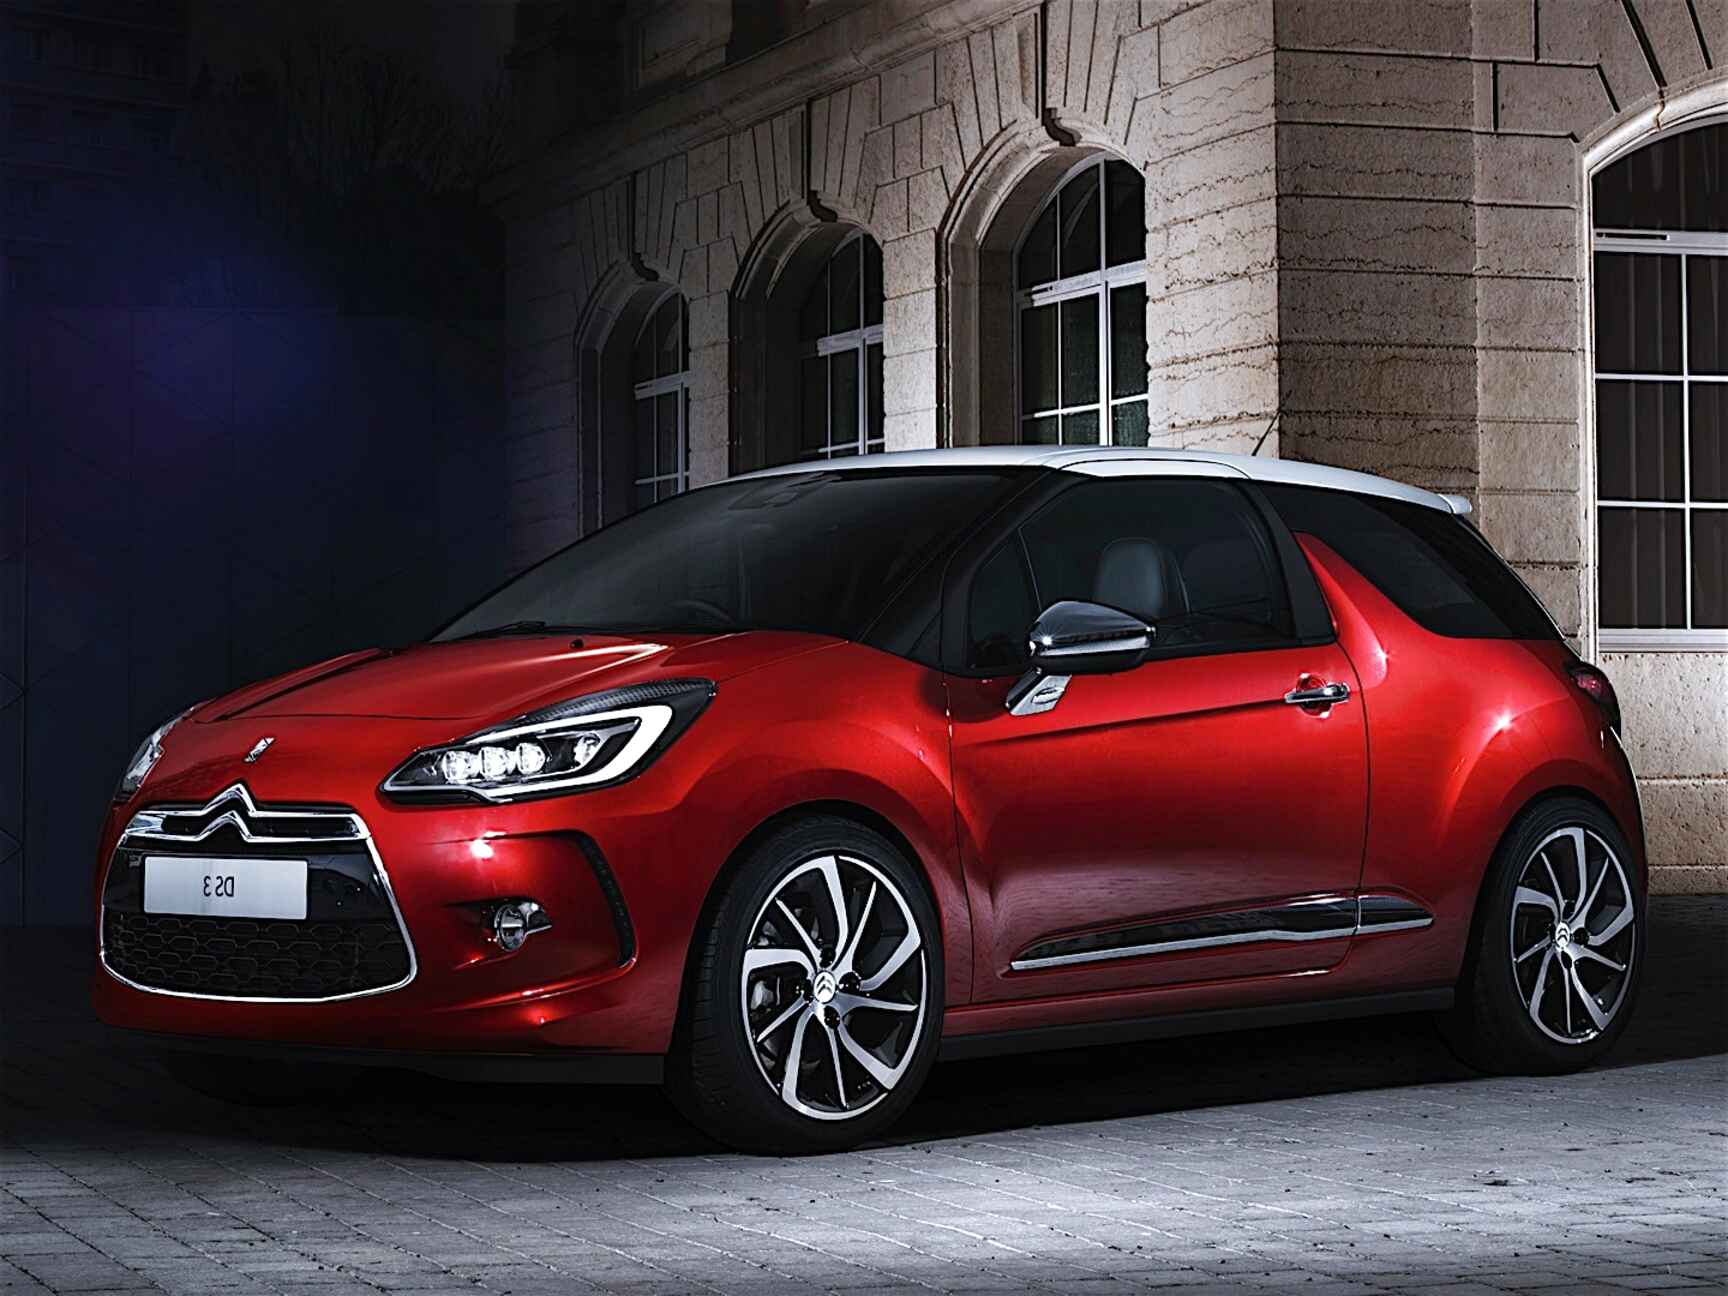 Citroen Ds3 Automatic for sale in UK | 60 used Citroen Ds3 Automatics